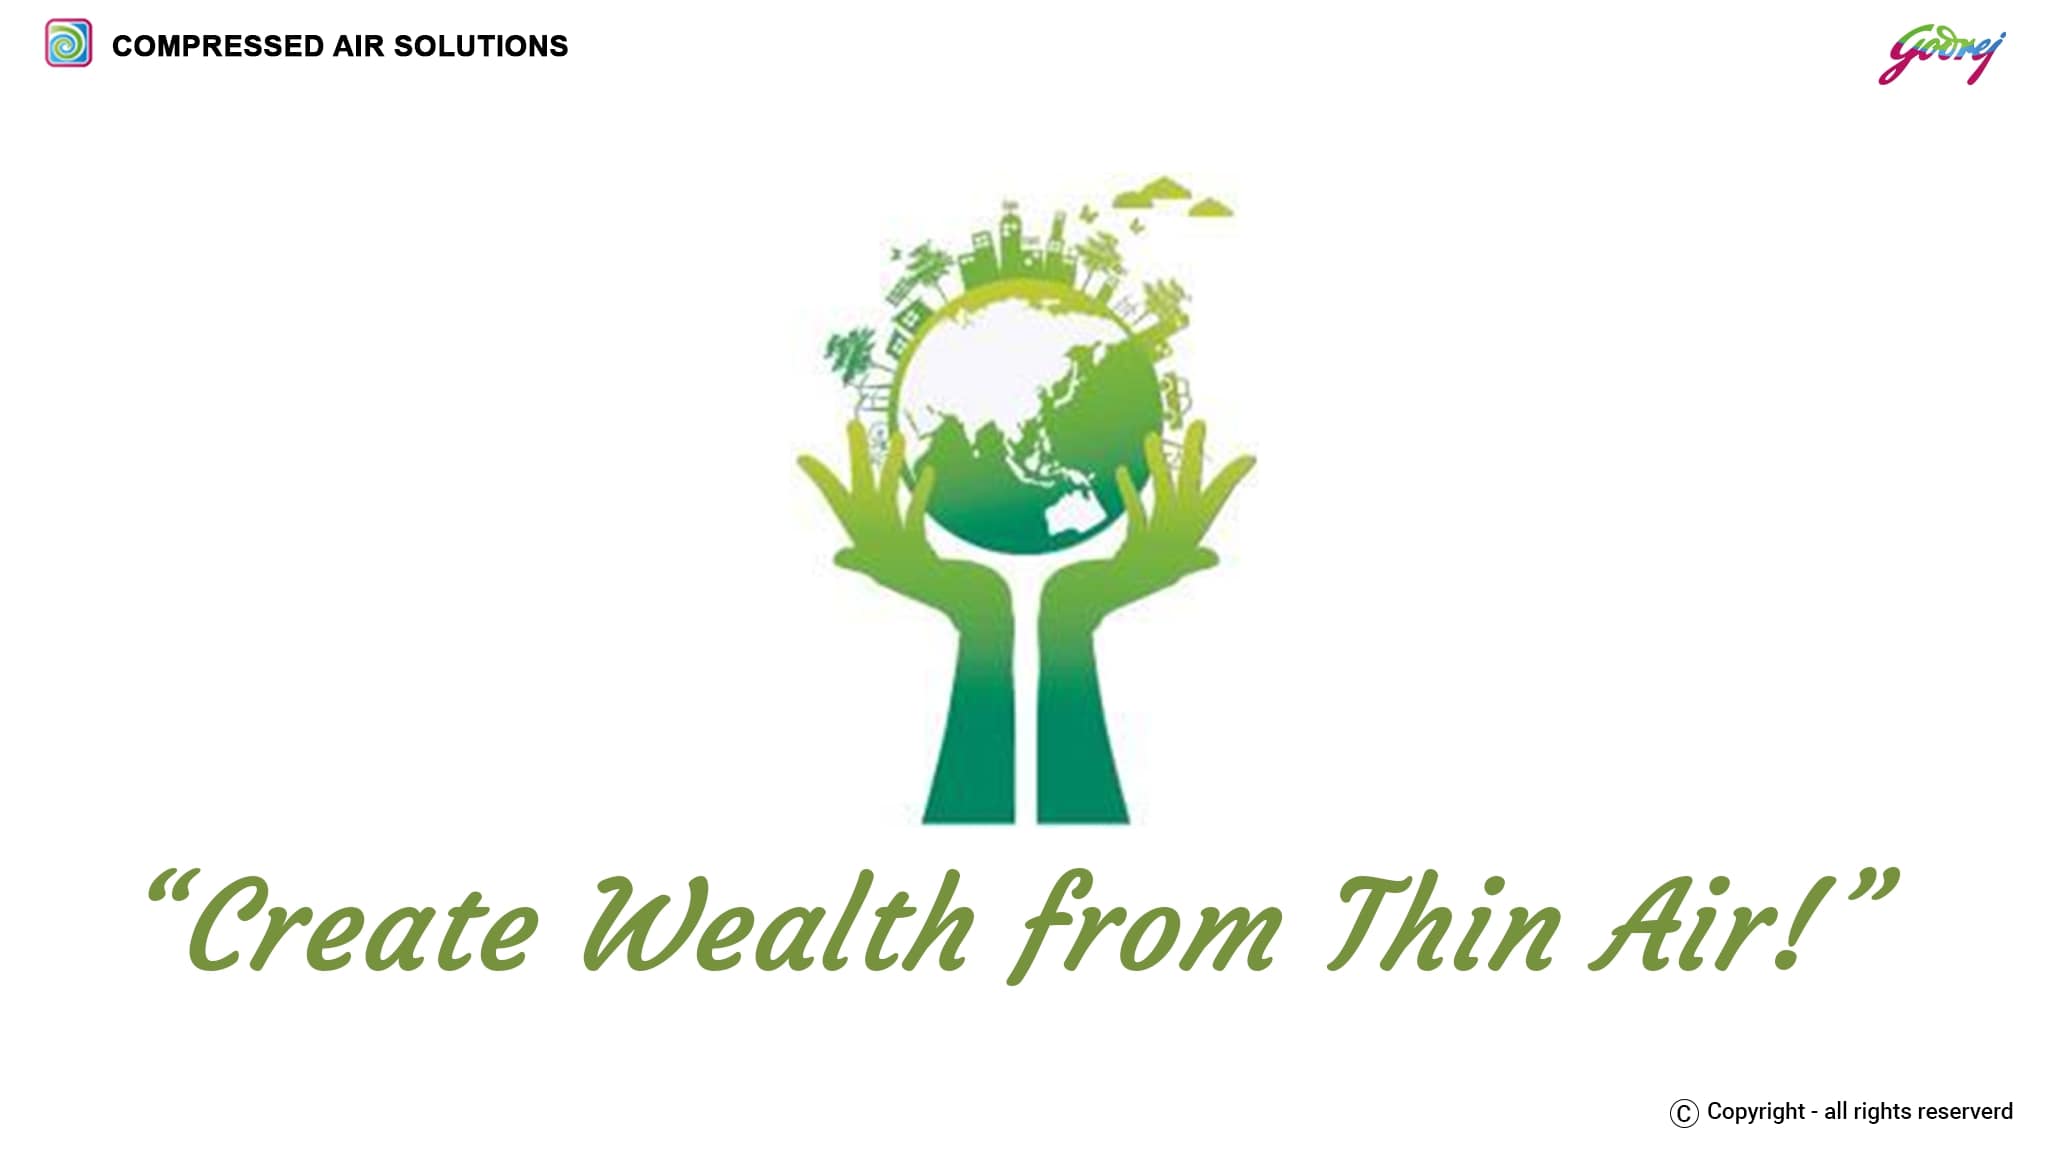 Create Wealth from Thin Air!- ENERGY SAVING SOLUTIONS IN COMPRESSED AIR NETWORK (GODREJ)